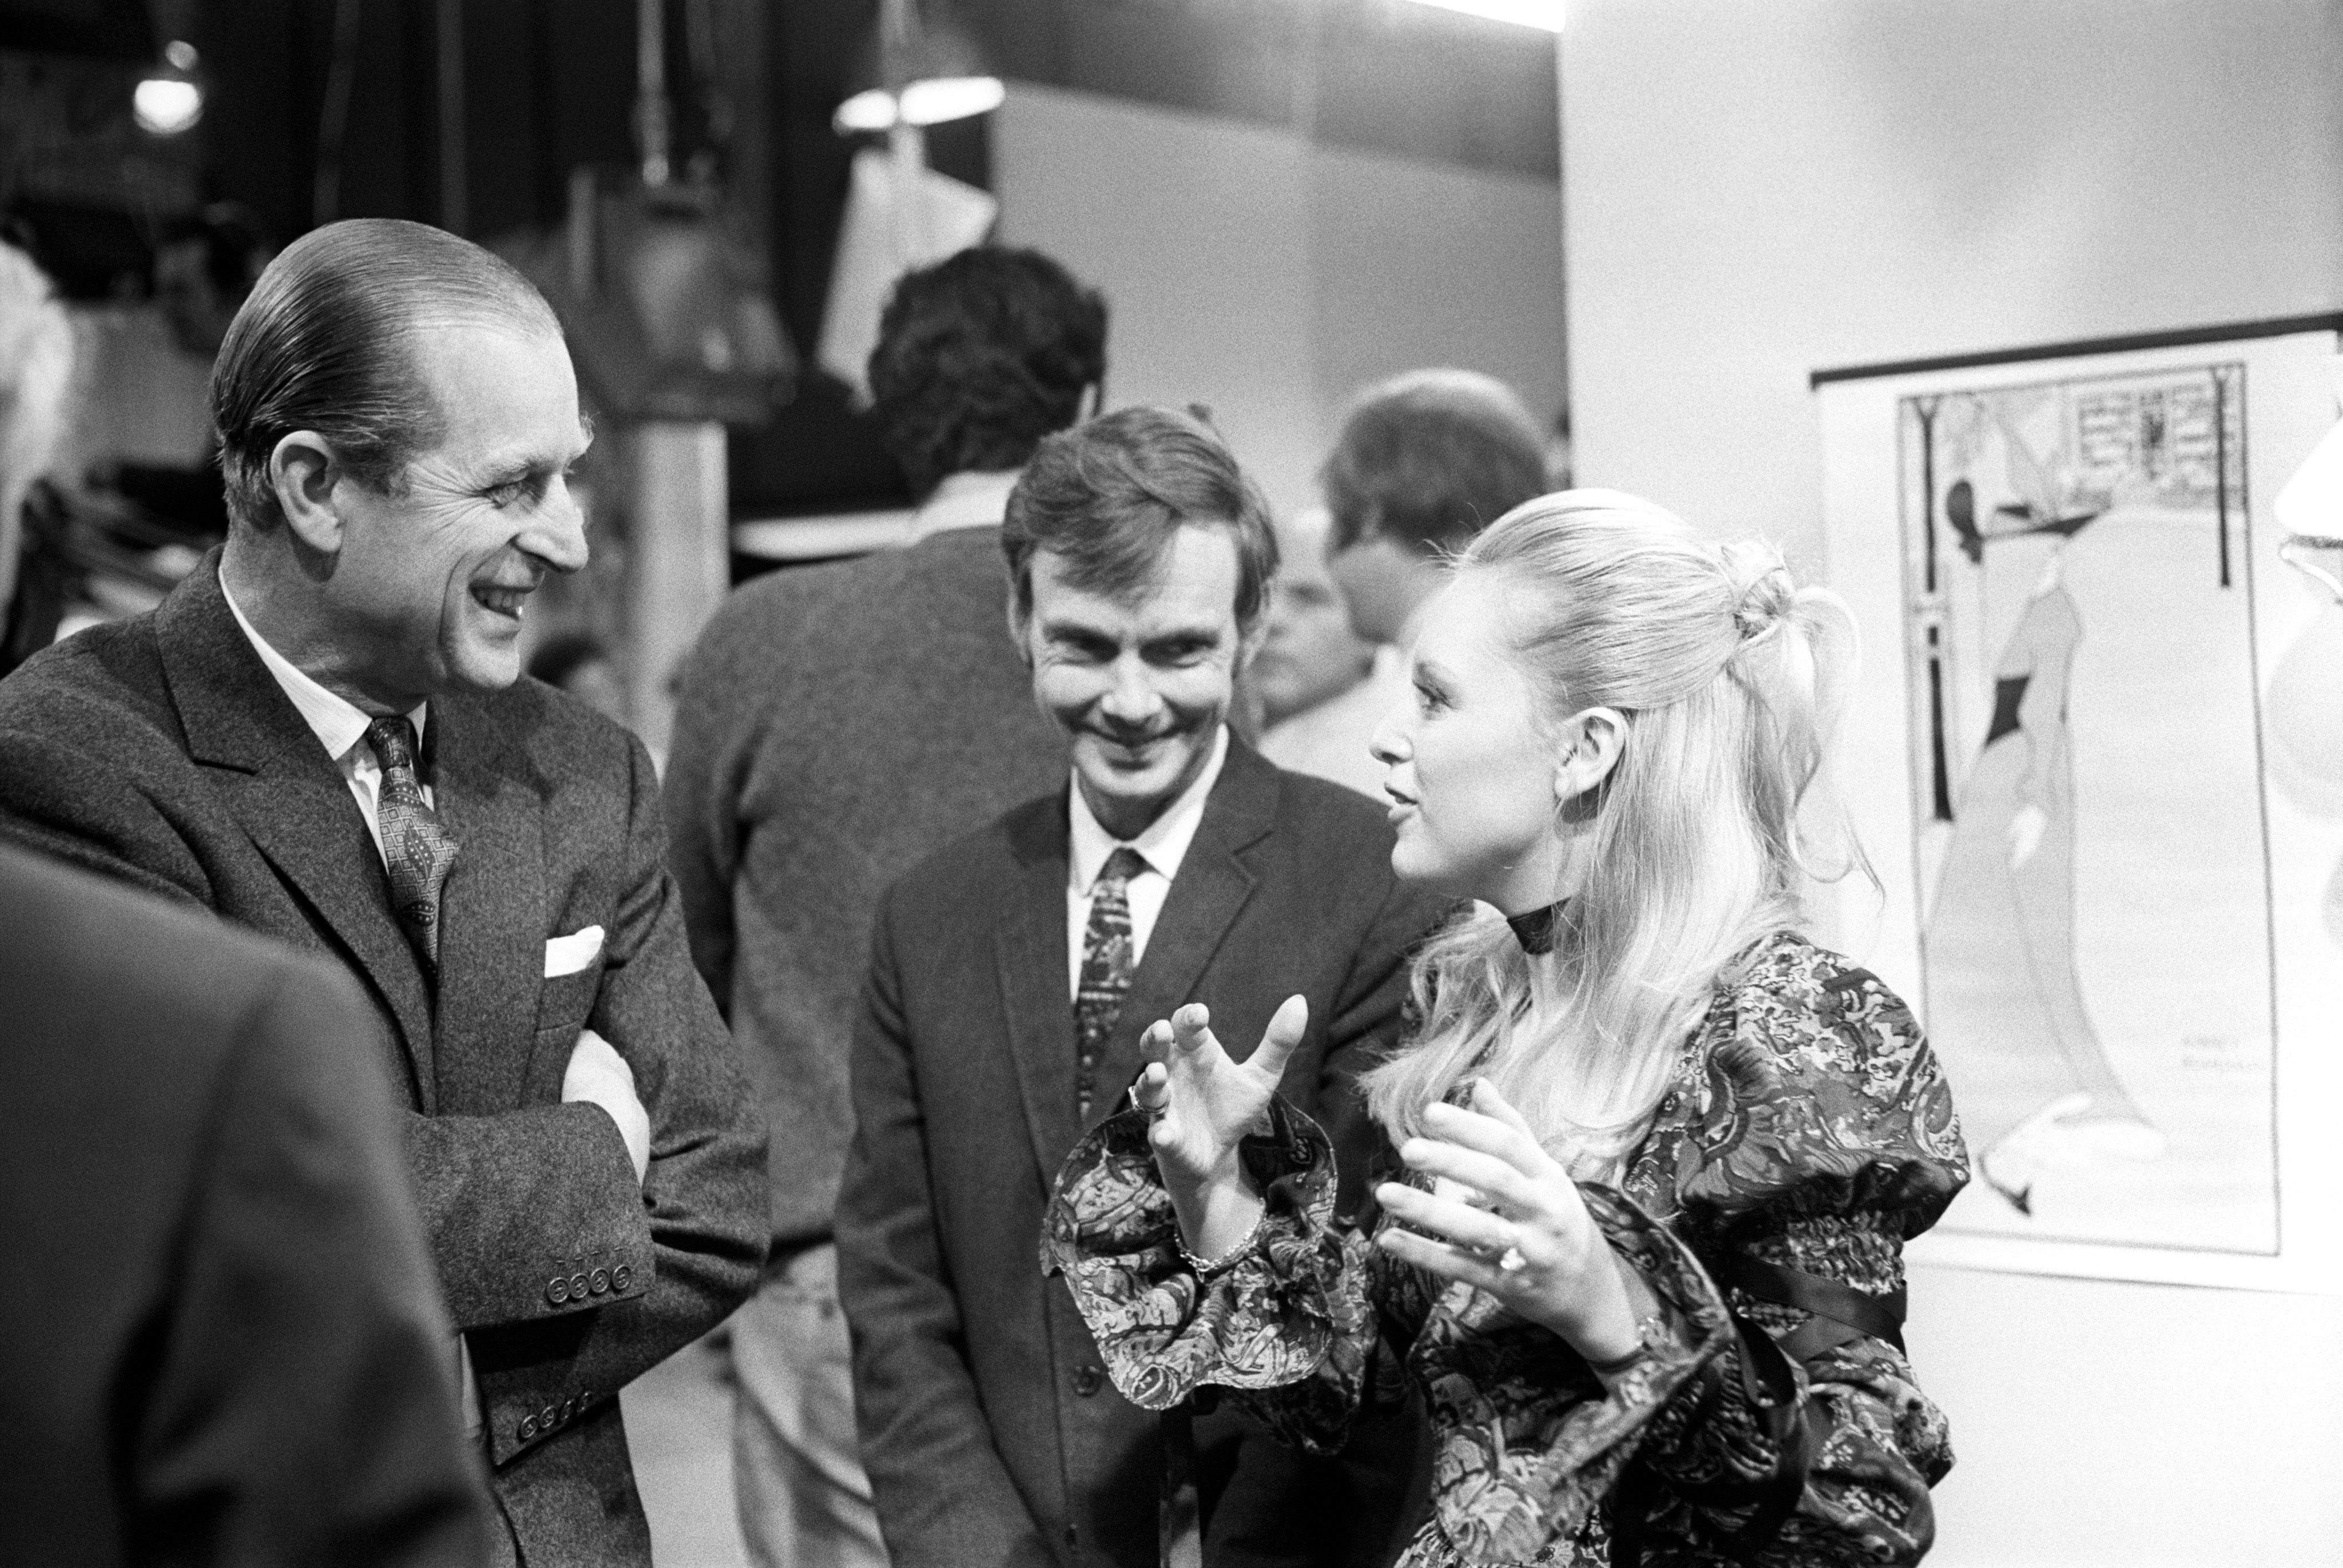 Prince Philip, The Duke of Edinburgh talks to producer, Reg Watson, and actress Jane Rossington during his visit to the set of "Crossroads", at ATV Studios. Miss Rossington plays the role of Jill Richardson in this long running serial.